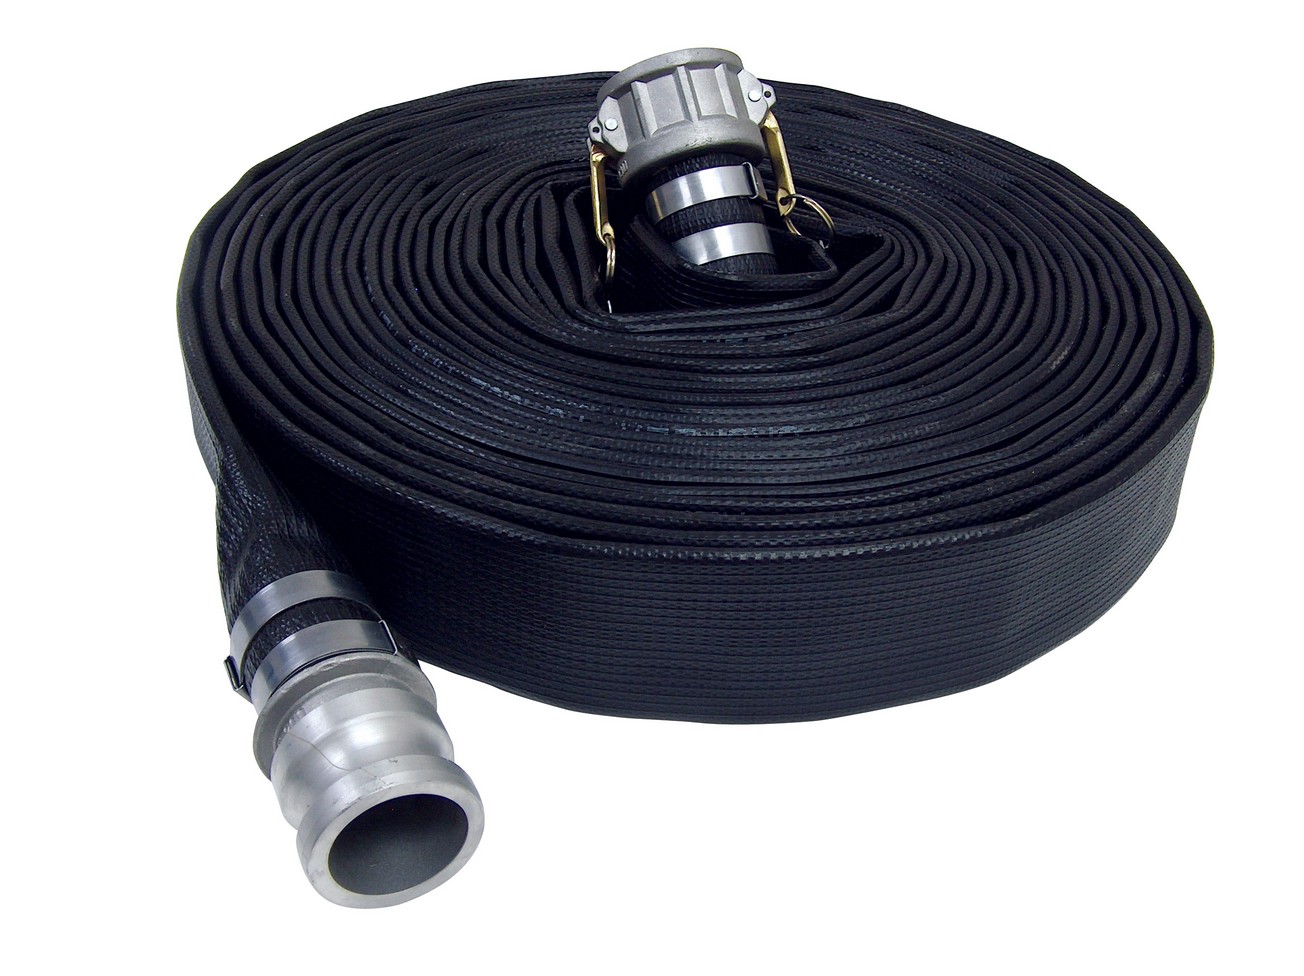 This is a lightweight high pressure, extremely strong hose for general wate...